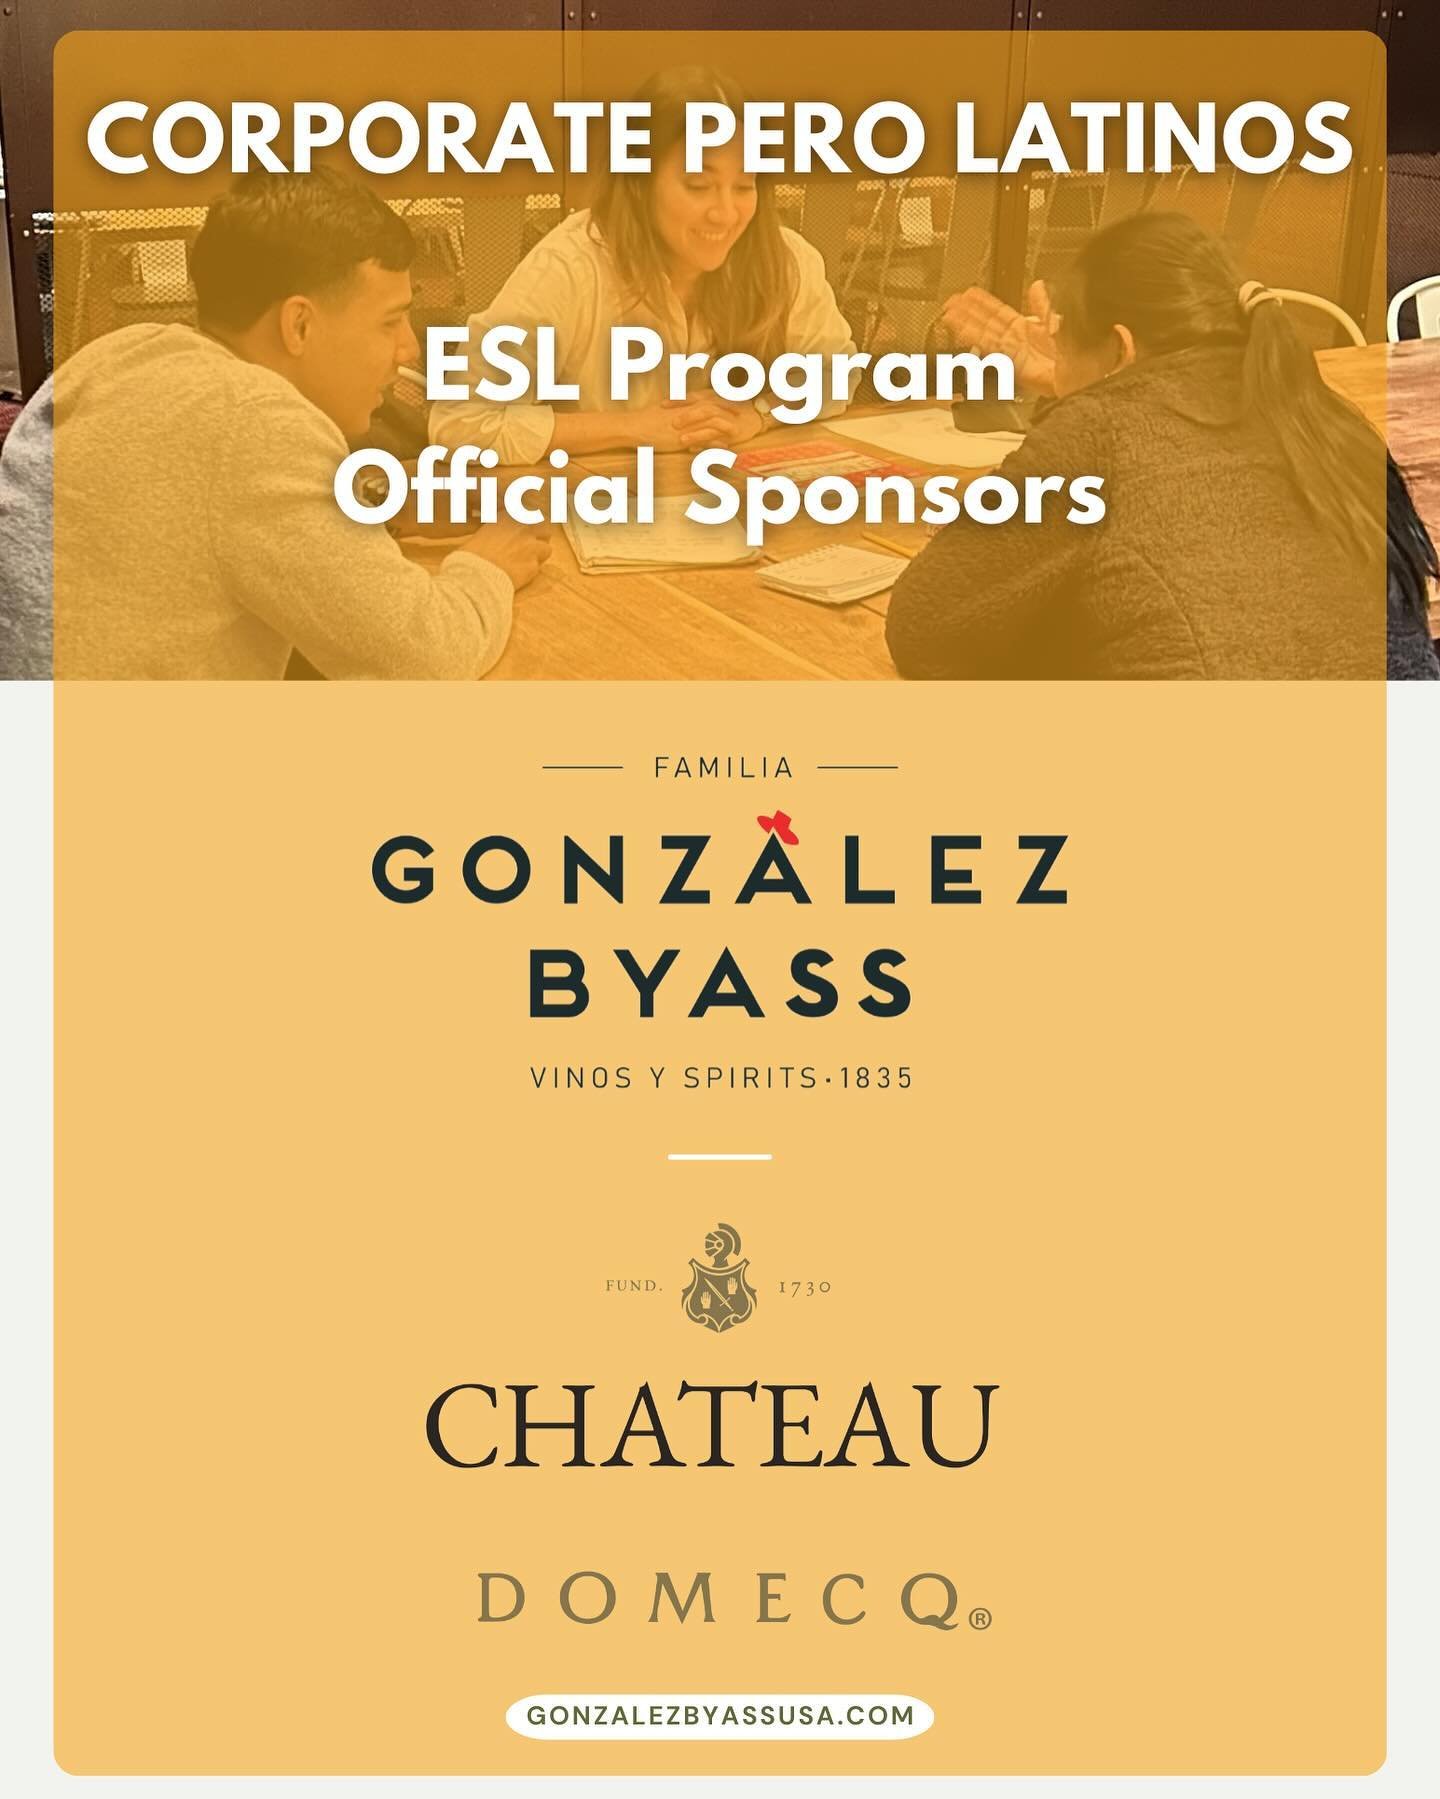 We are excited to announce @gonzalezbyassusa as our 2024 ESL Program Official &ldquo;Mero Mero&rdquo; Sponsors! 🌟 

Gonzalez Byass USA shares our mission of bringing people together and facilitating connections through shared experiences and recogni